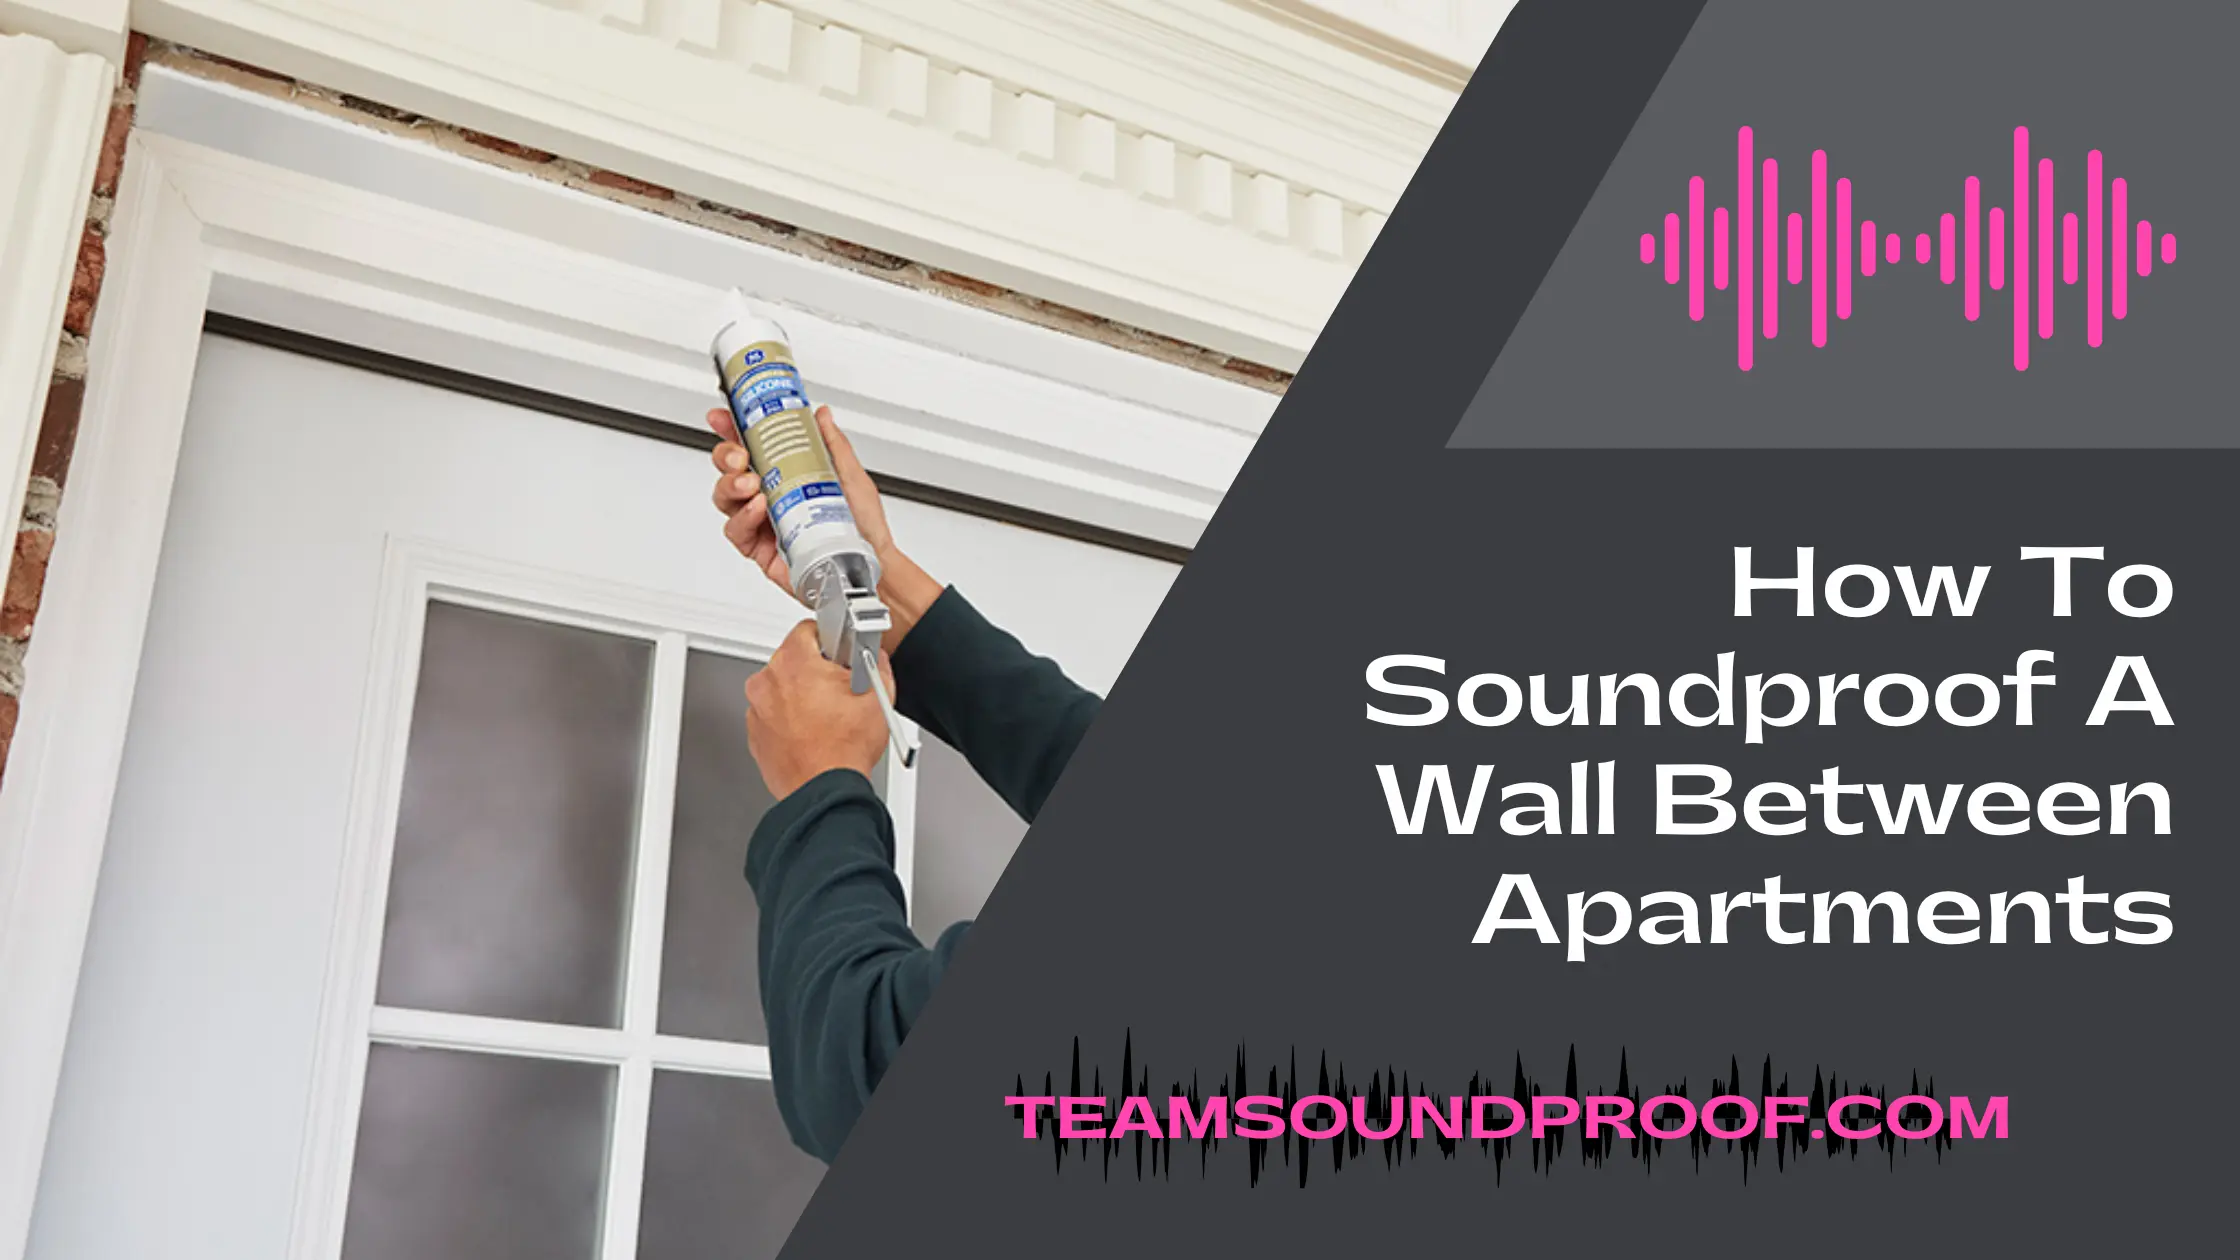 How to Soundproof a Wall Between Apartments? Pro Guide